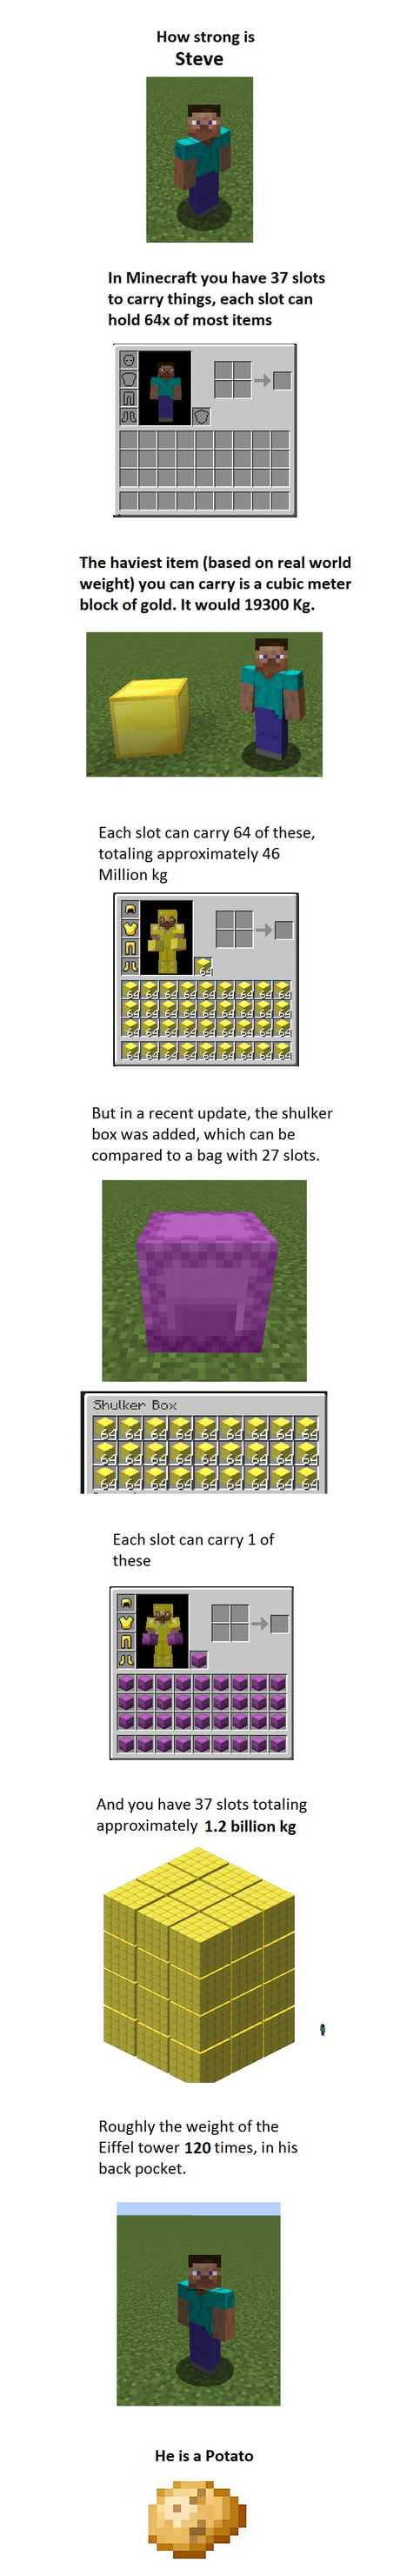 How Much Weight Can Minecraft Steve Carry? 